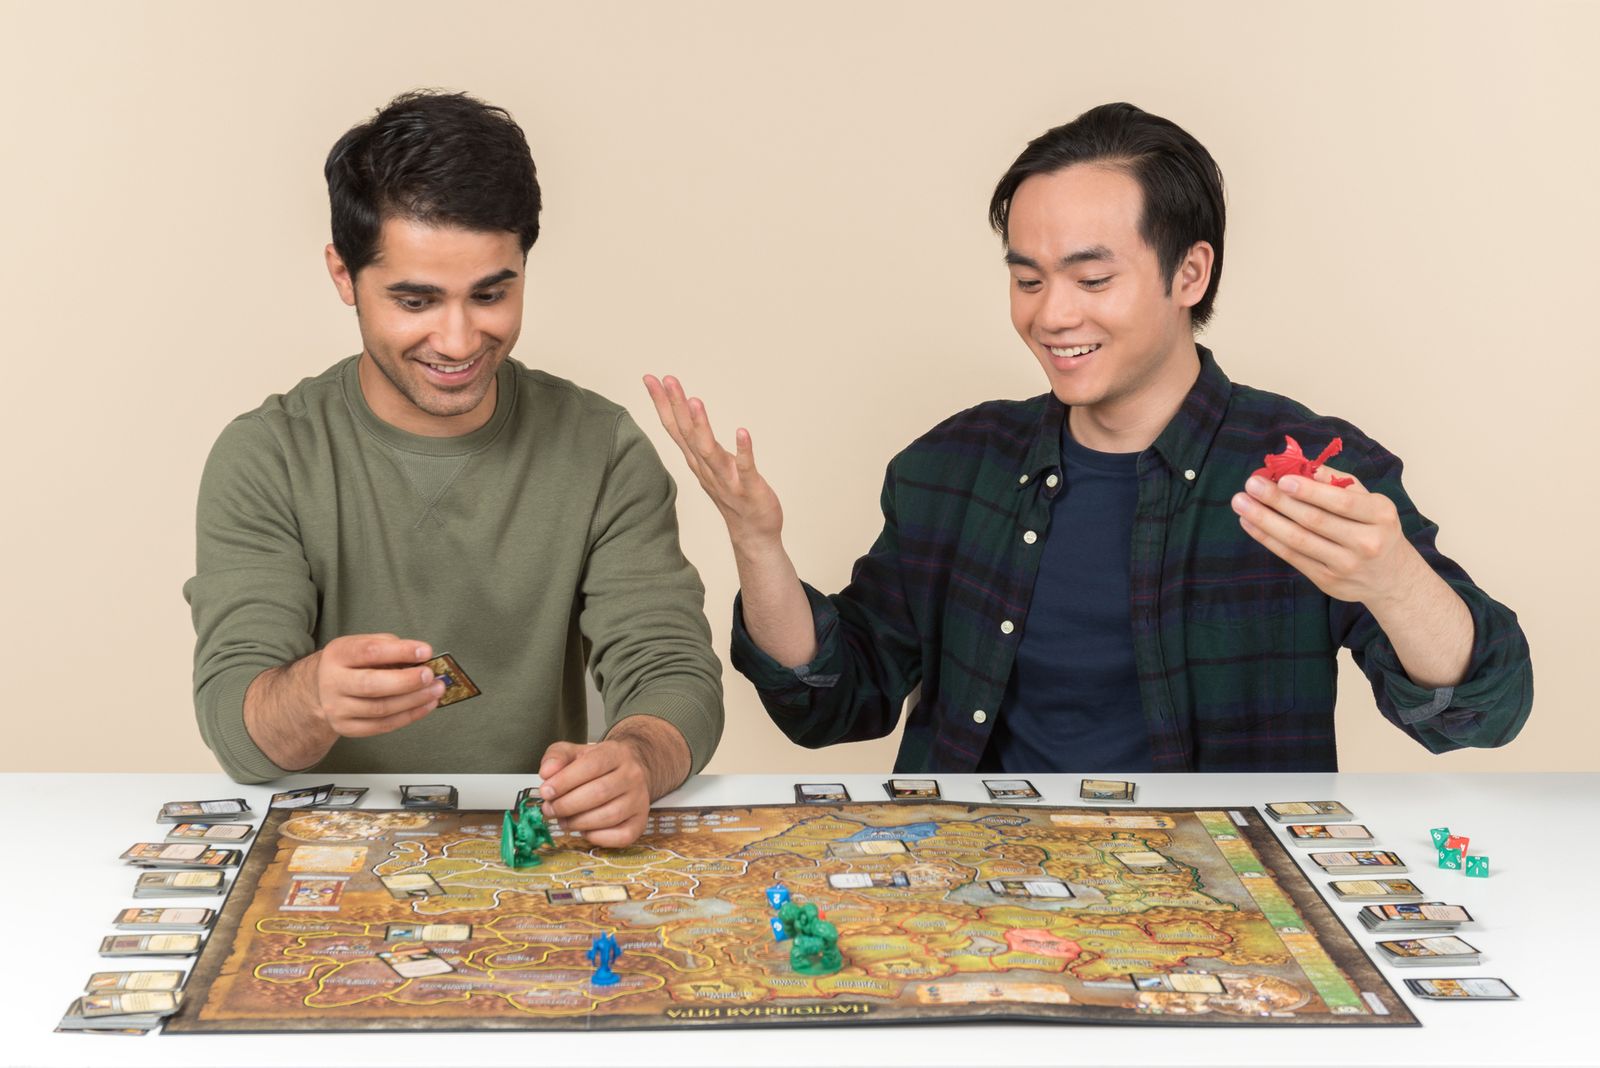 Friends Only: a special collection of Friendship Day images: Playing board game with a friend